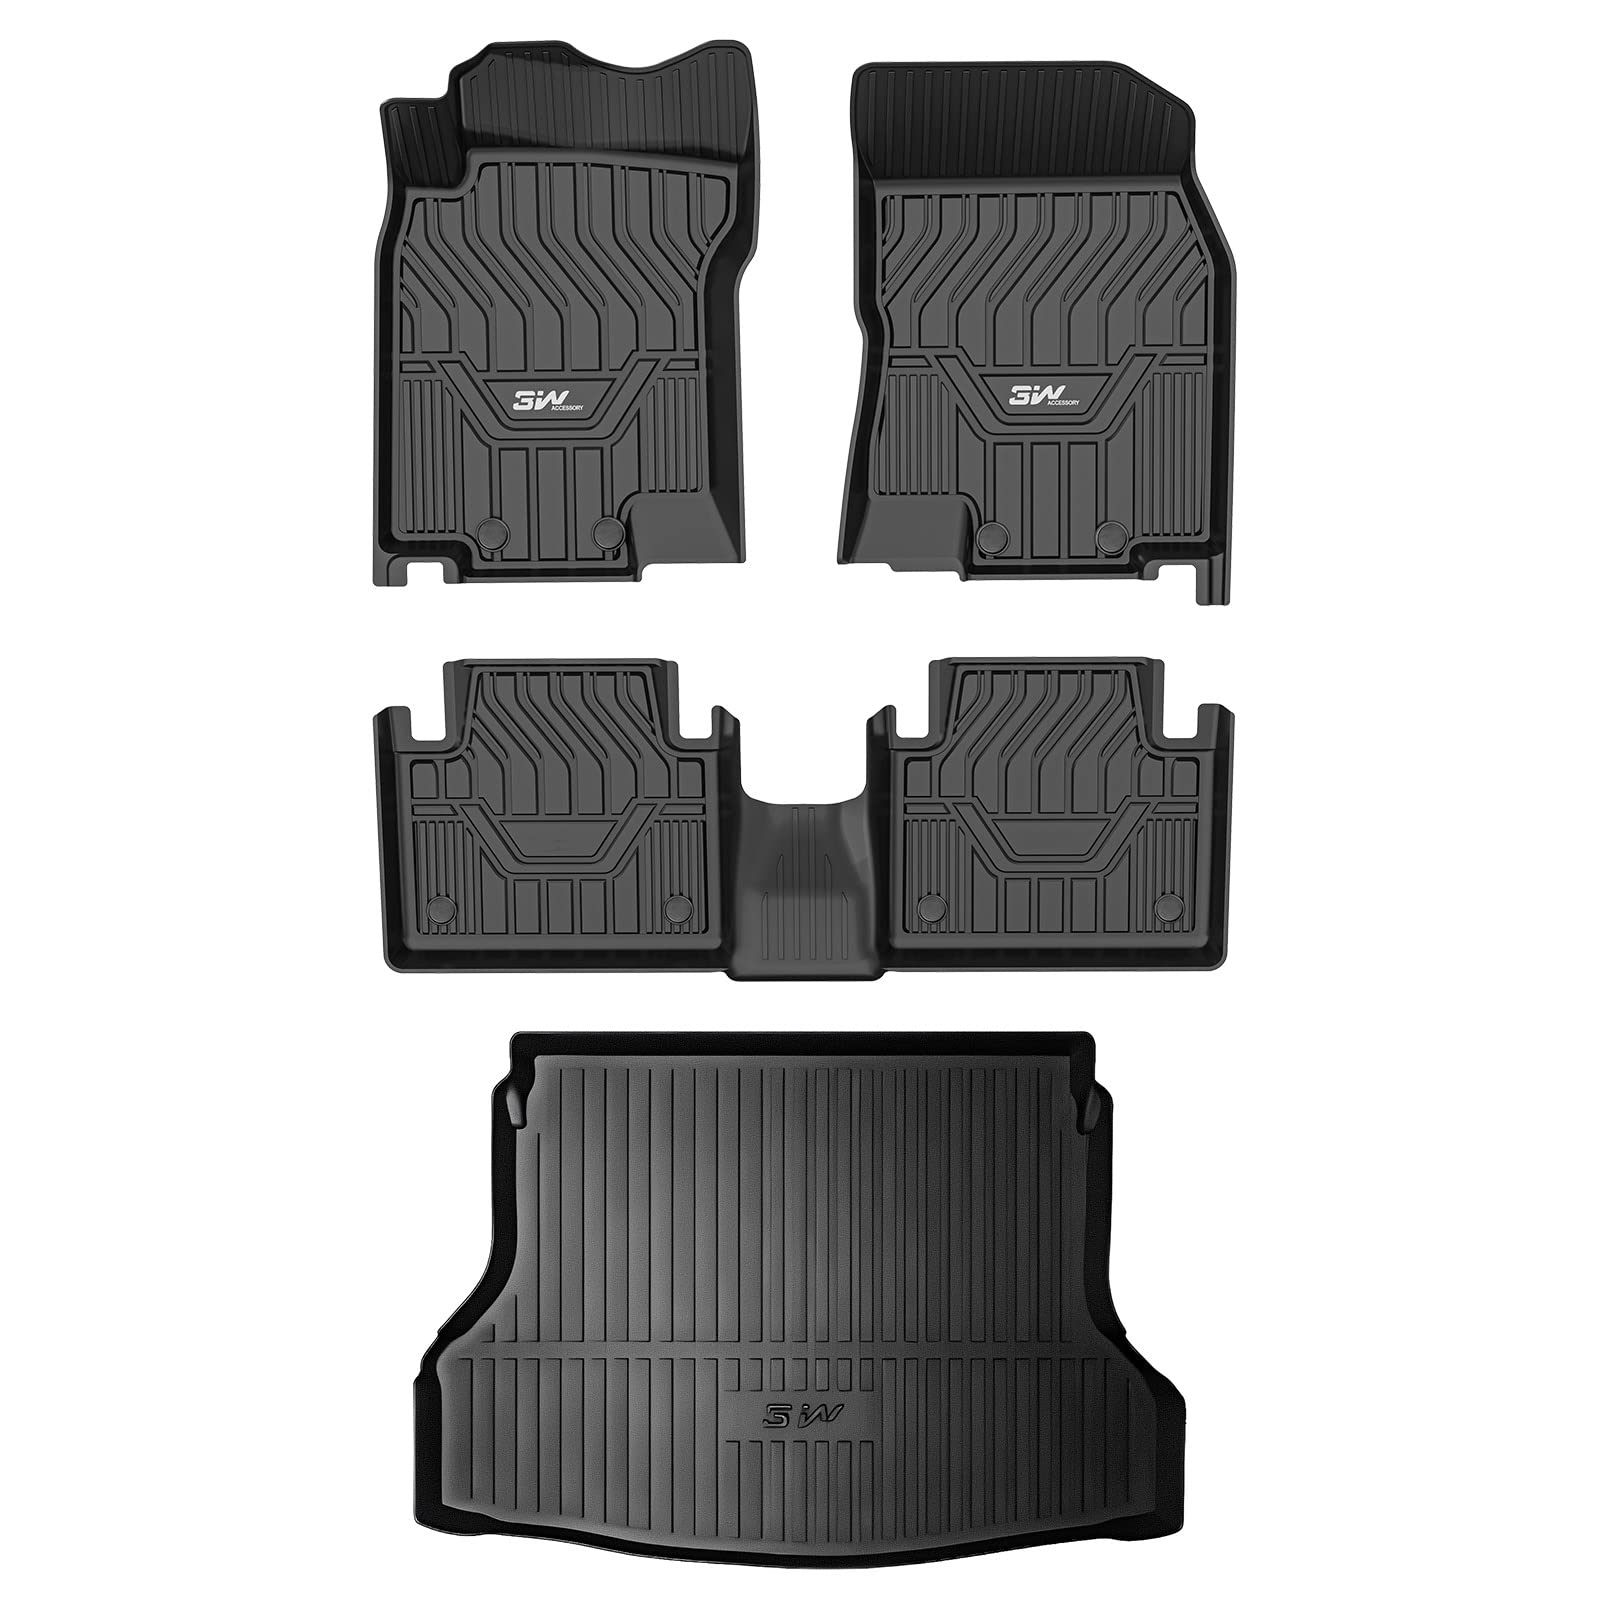 3W Nissan Rogue 2014-2020 Custom Floor Mats Cargo Liner TPE Material & All-Weather Protection Vehicles & Parts 3w 2014-2020 Rogue 2014-2020 1st&2nd Row Mats+Rear Trunk Mat